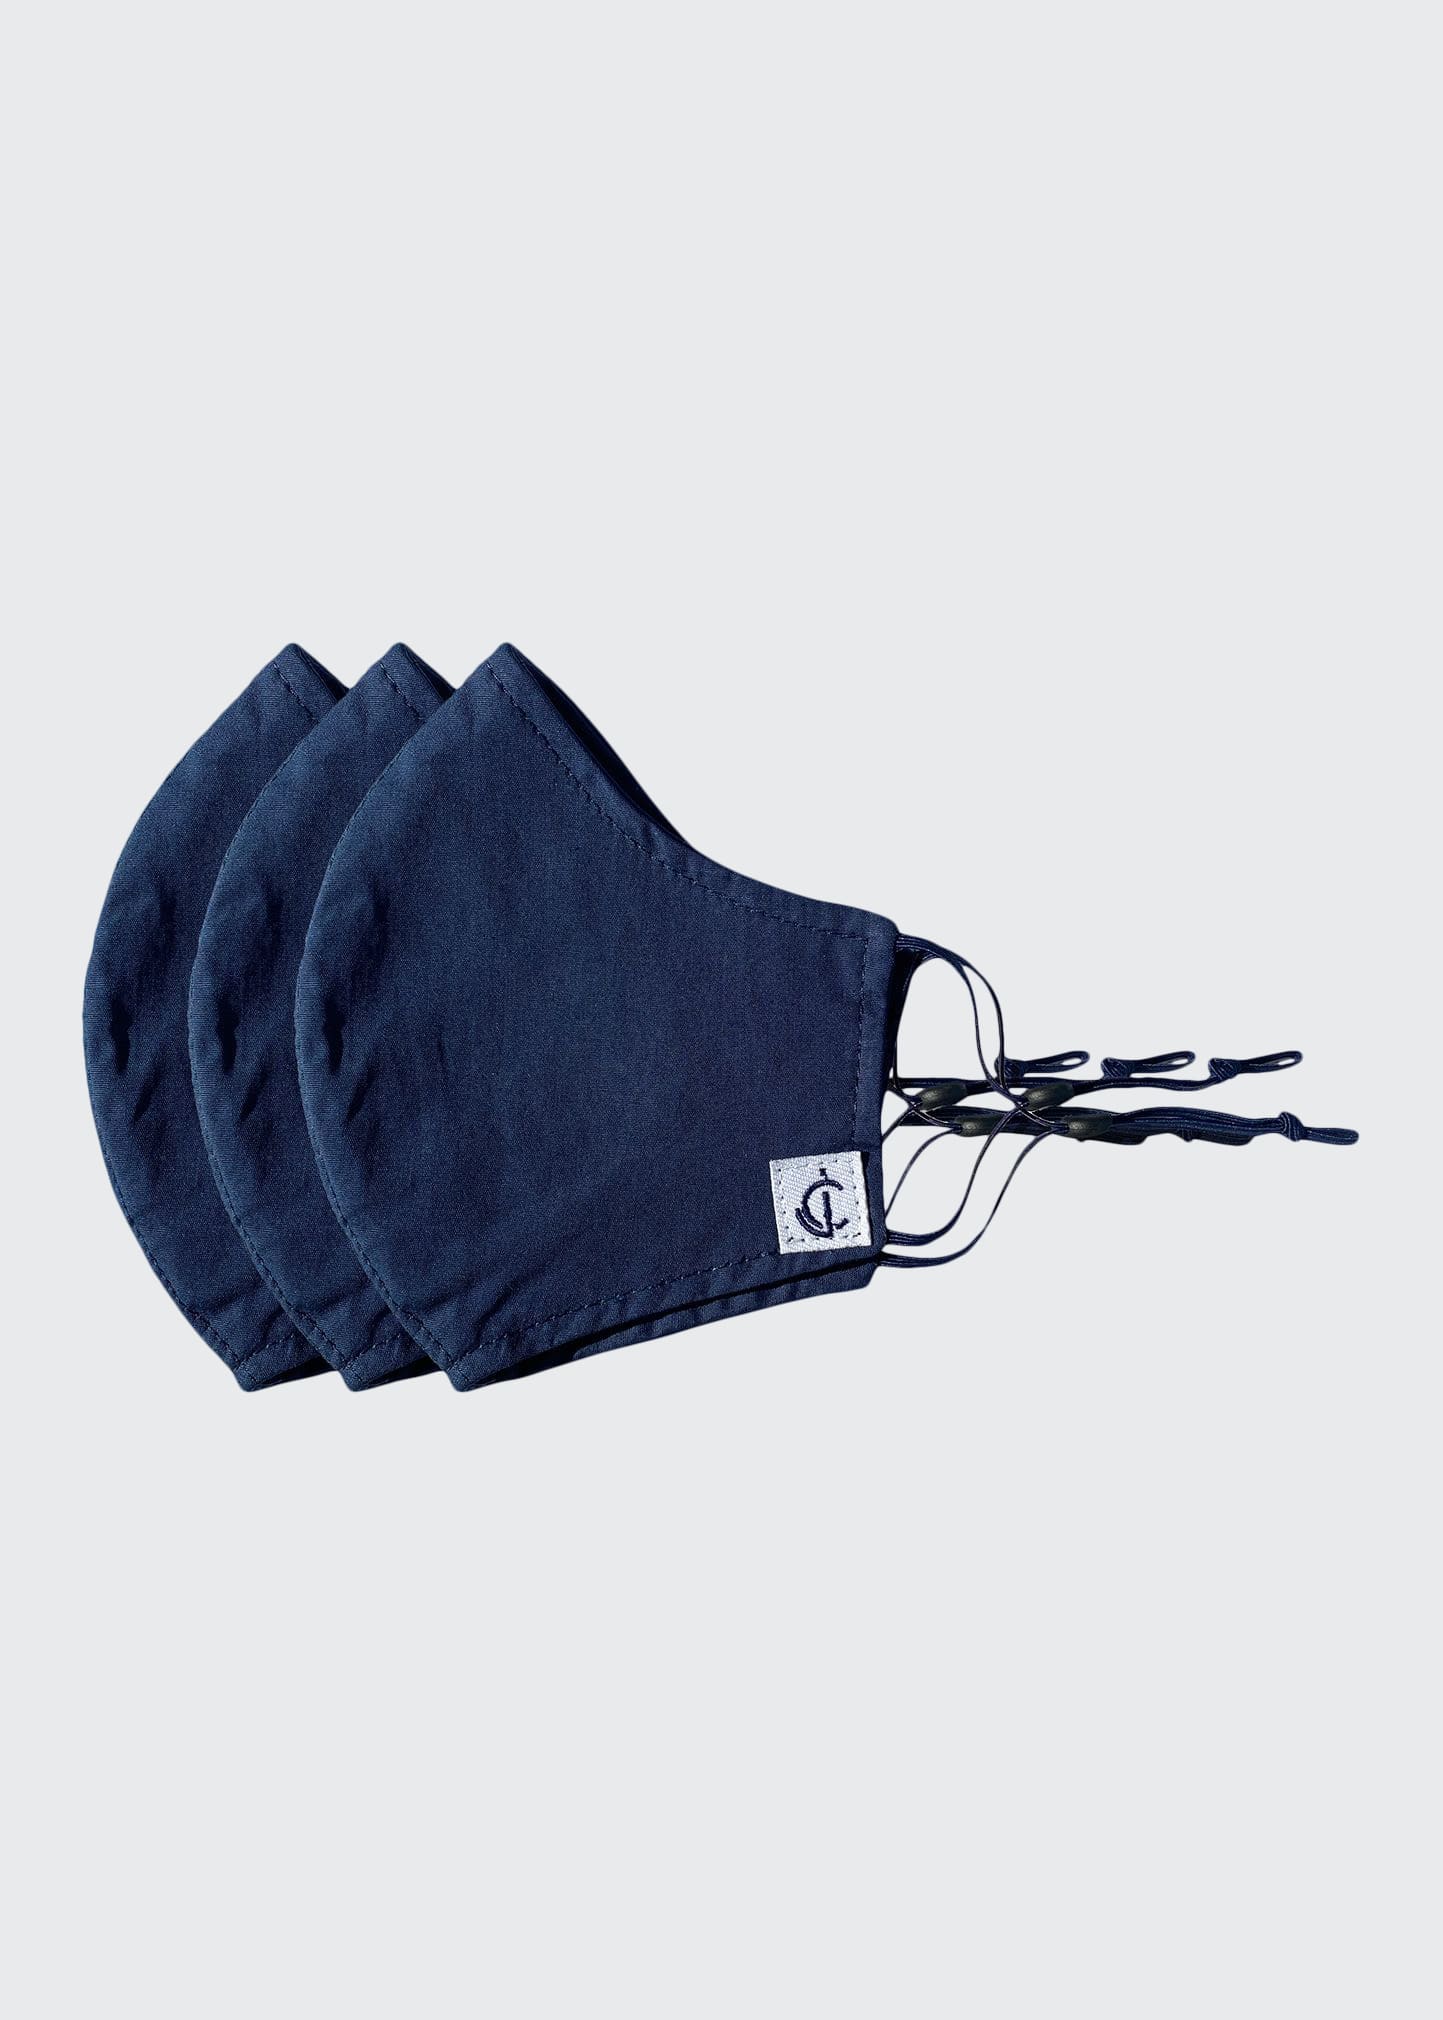 Reusable Protective Face Mask Coverings, Set of 3 - Navy